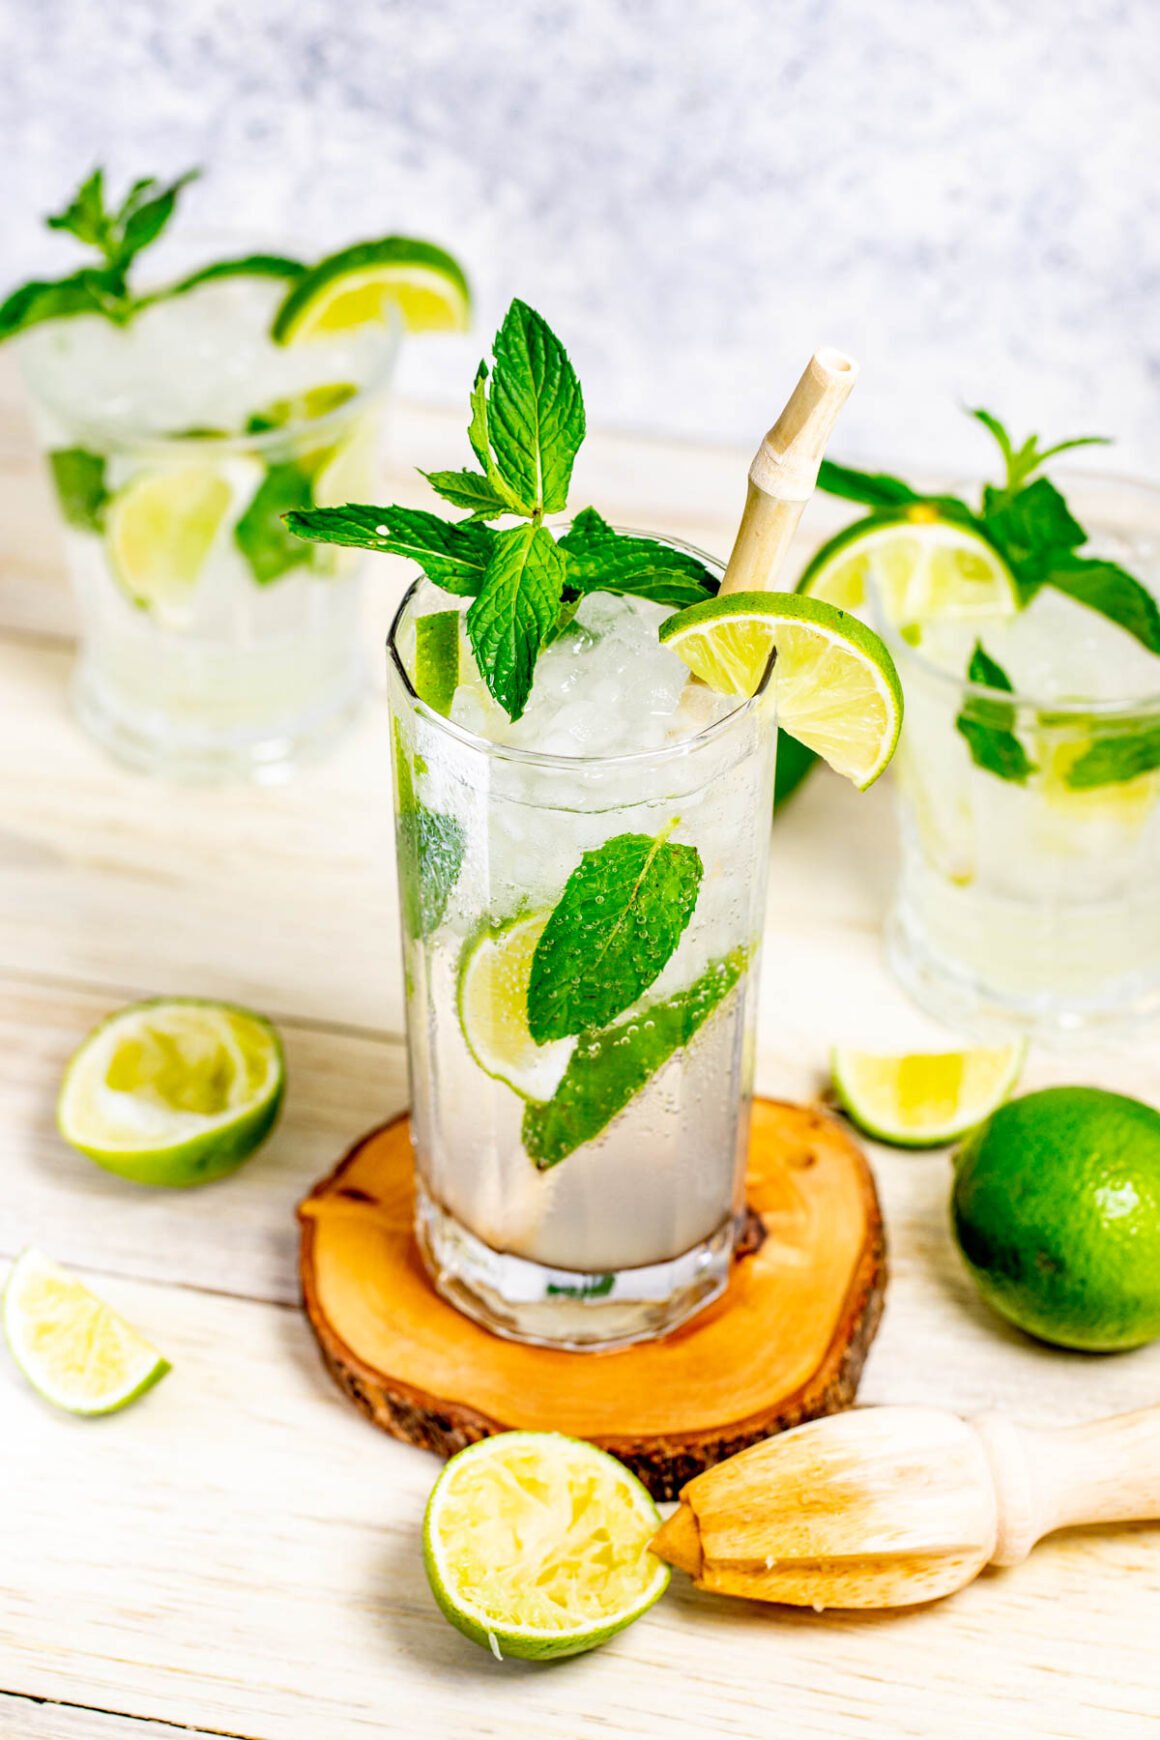 Classic Mojito It is a popular recipe for its balanced tangy flavor mixed with fresh mint and a bubbly end that make a perfect cocktail for this hot summer!